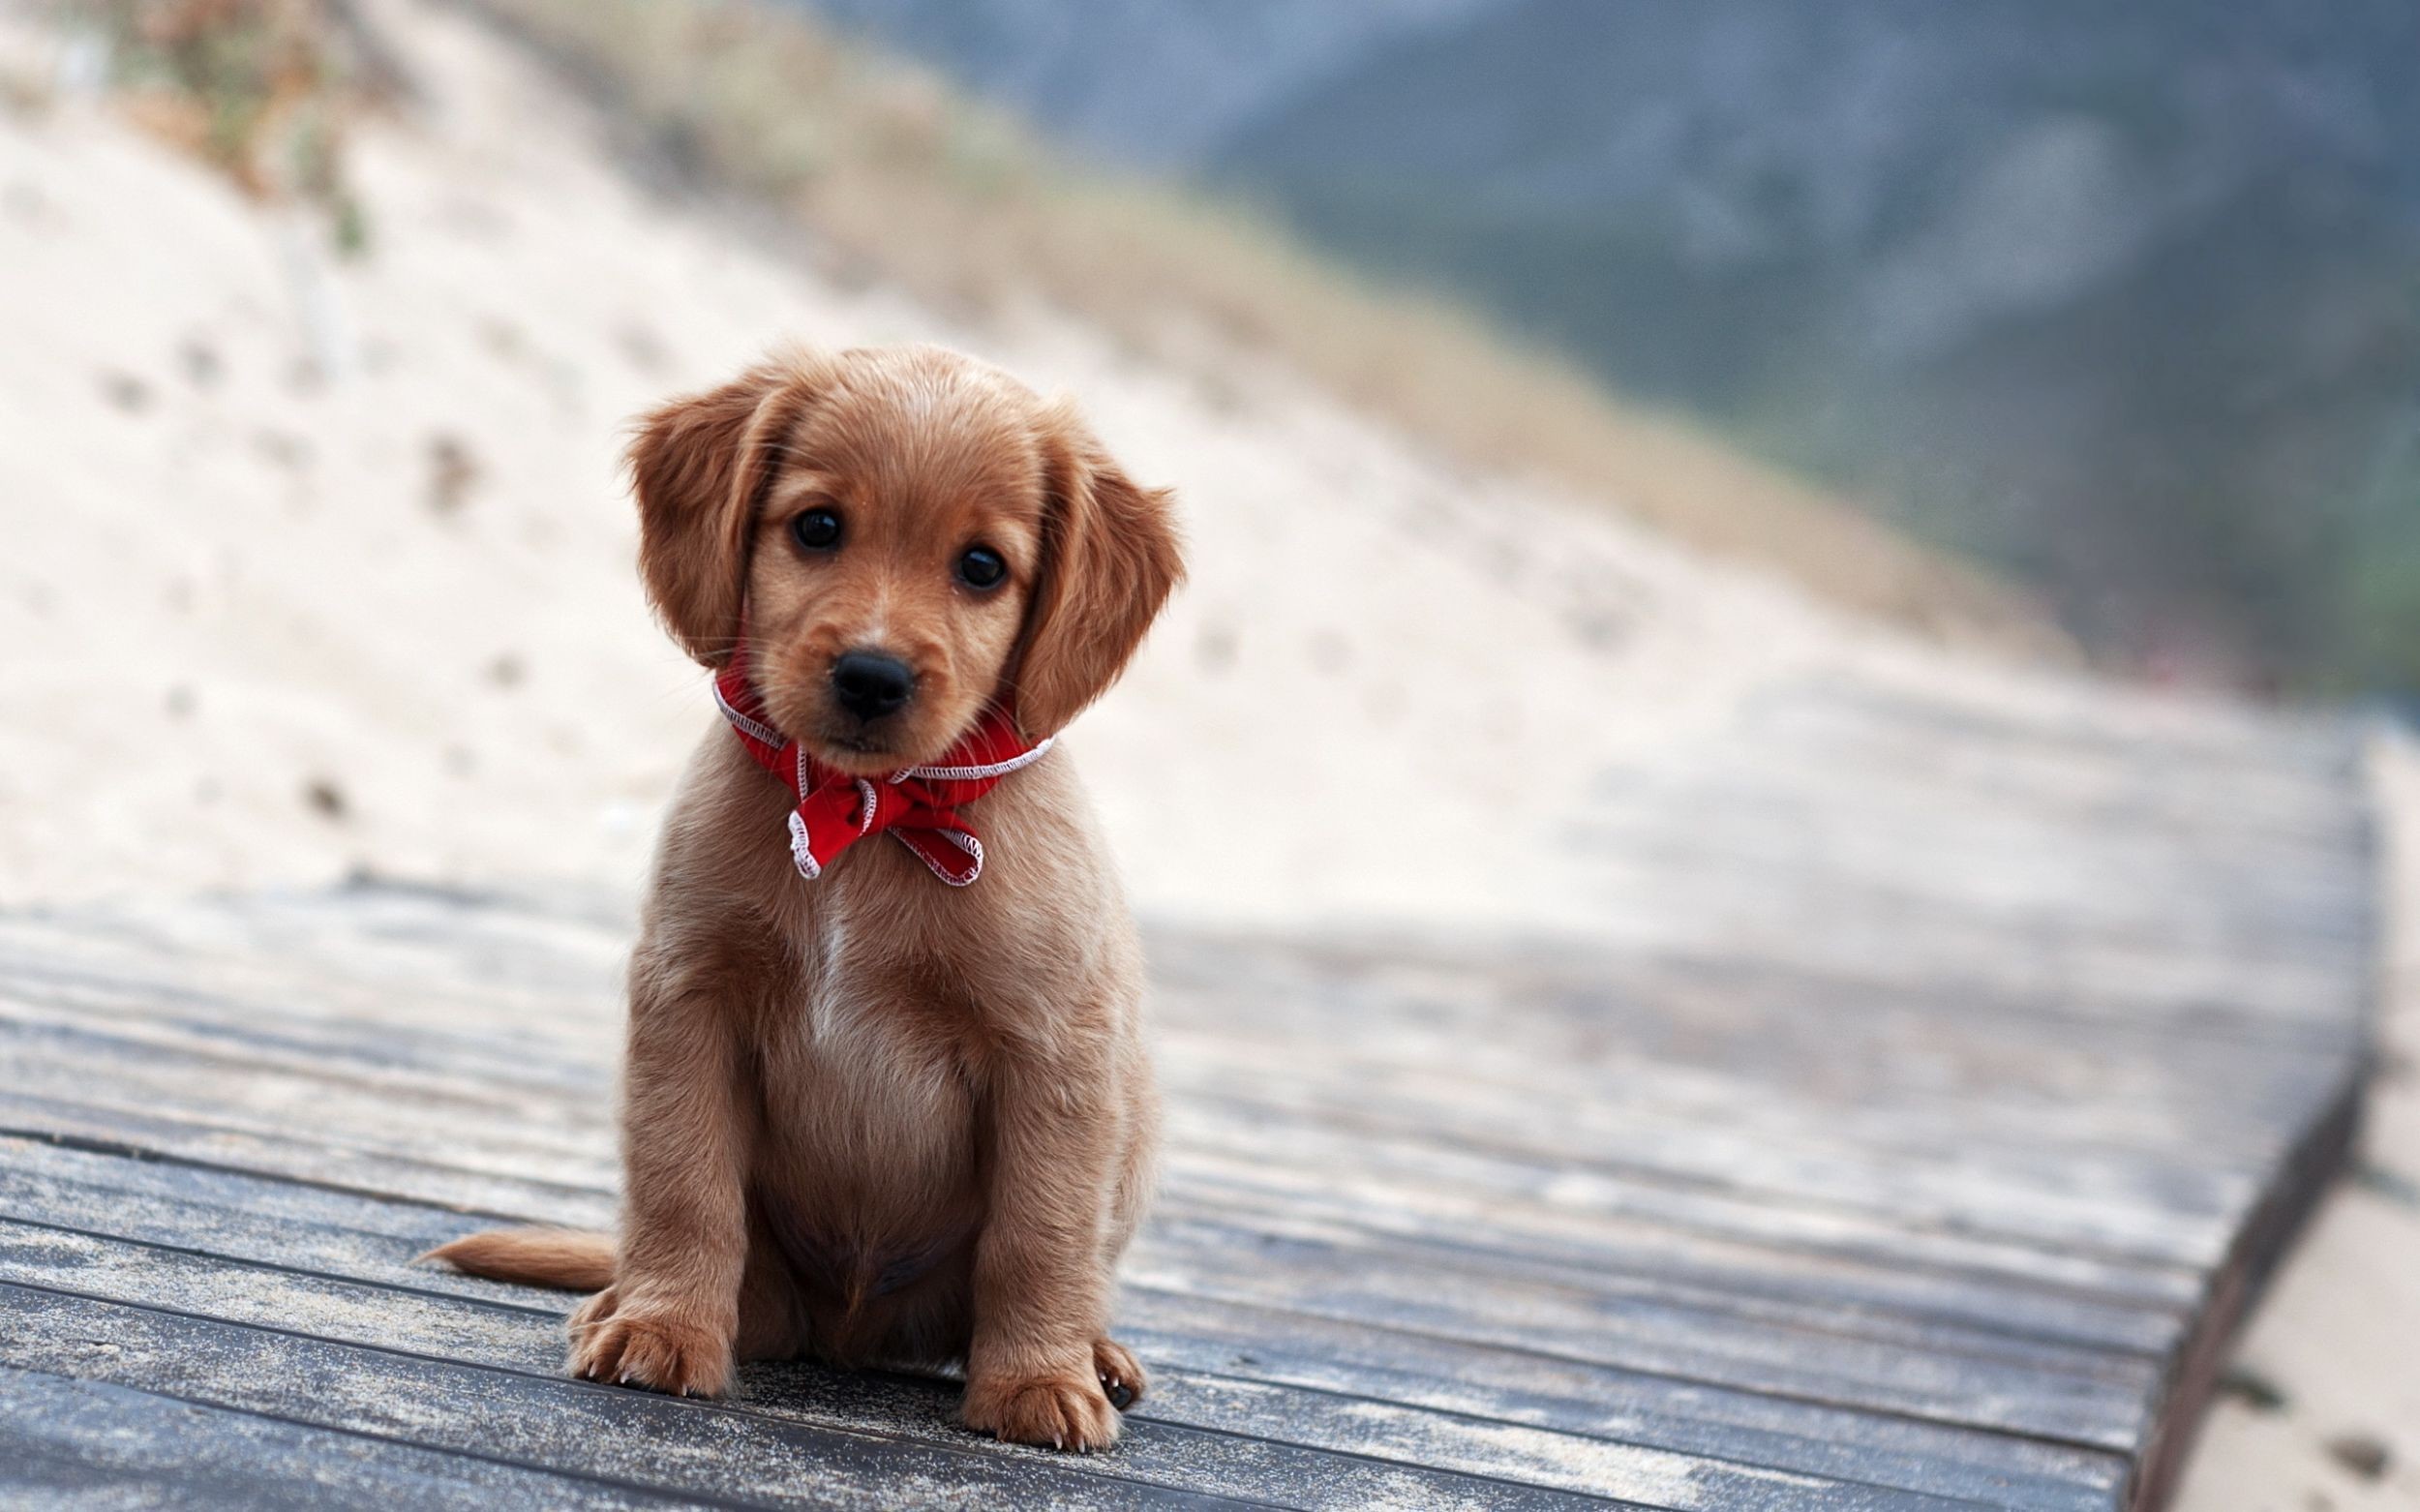 2500x1562 Cool Cute Puppy Backgrounds for Desktop: 07.16.14 – download free